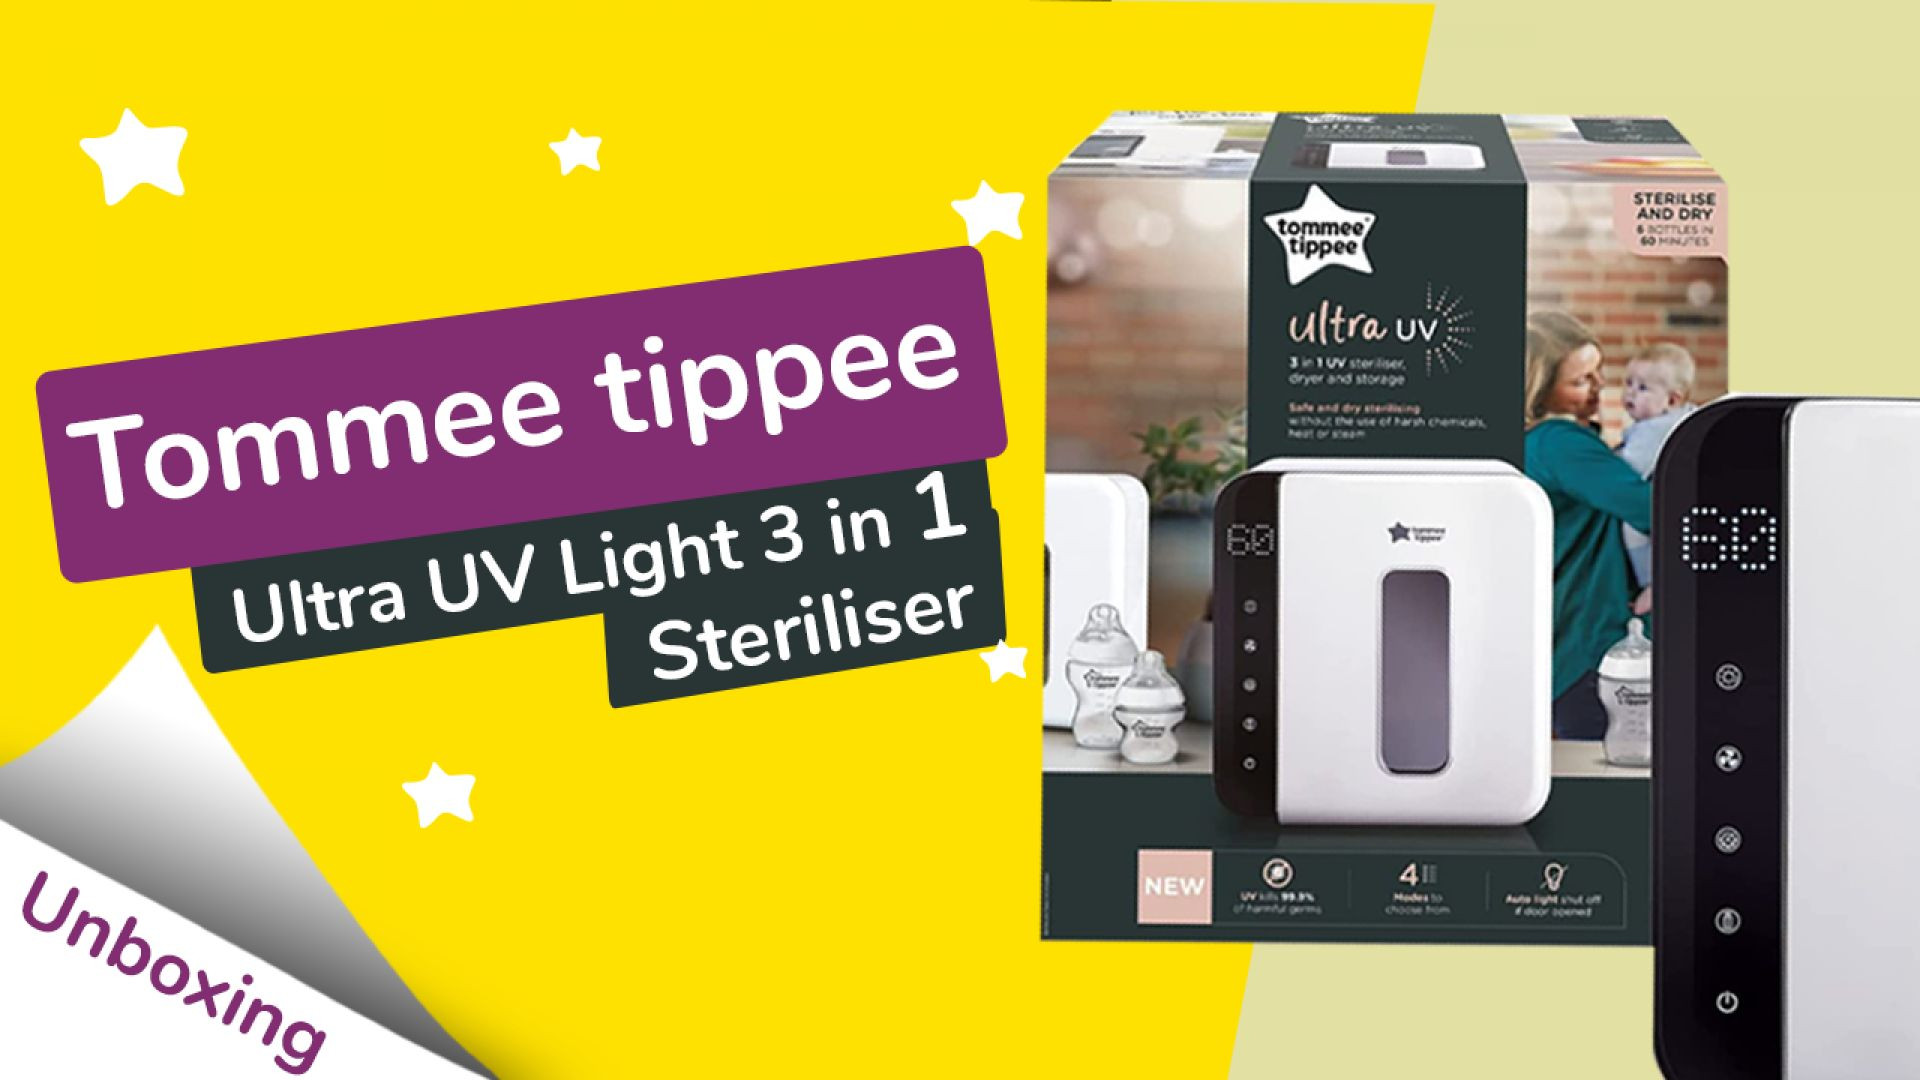 Tommee tippee unboxing-2021